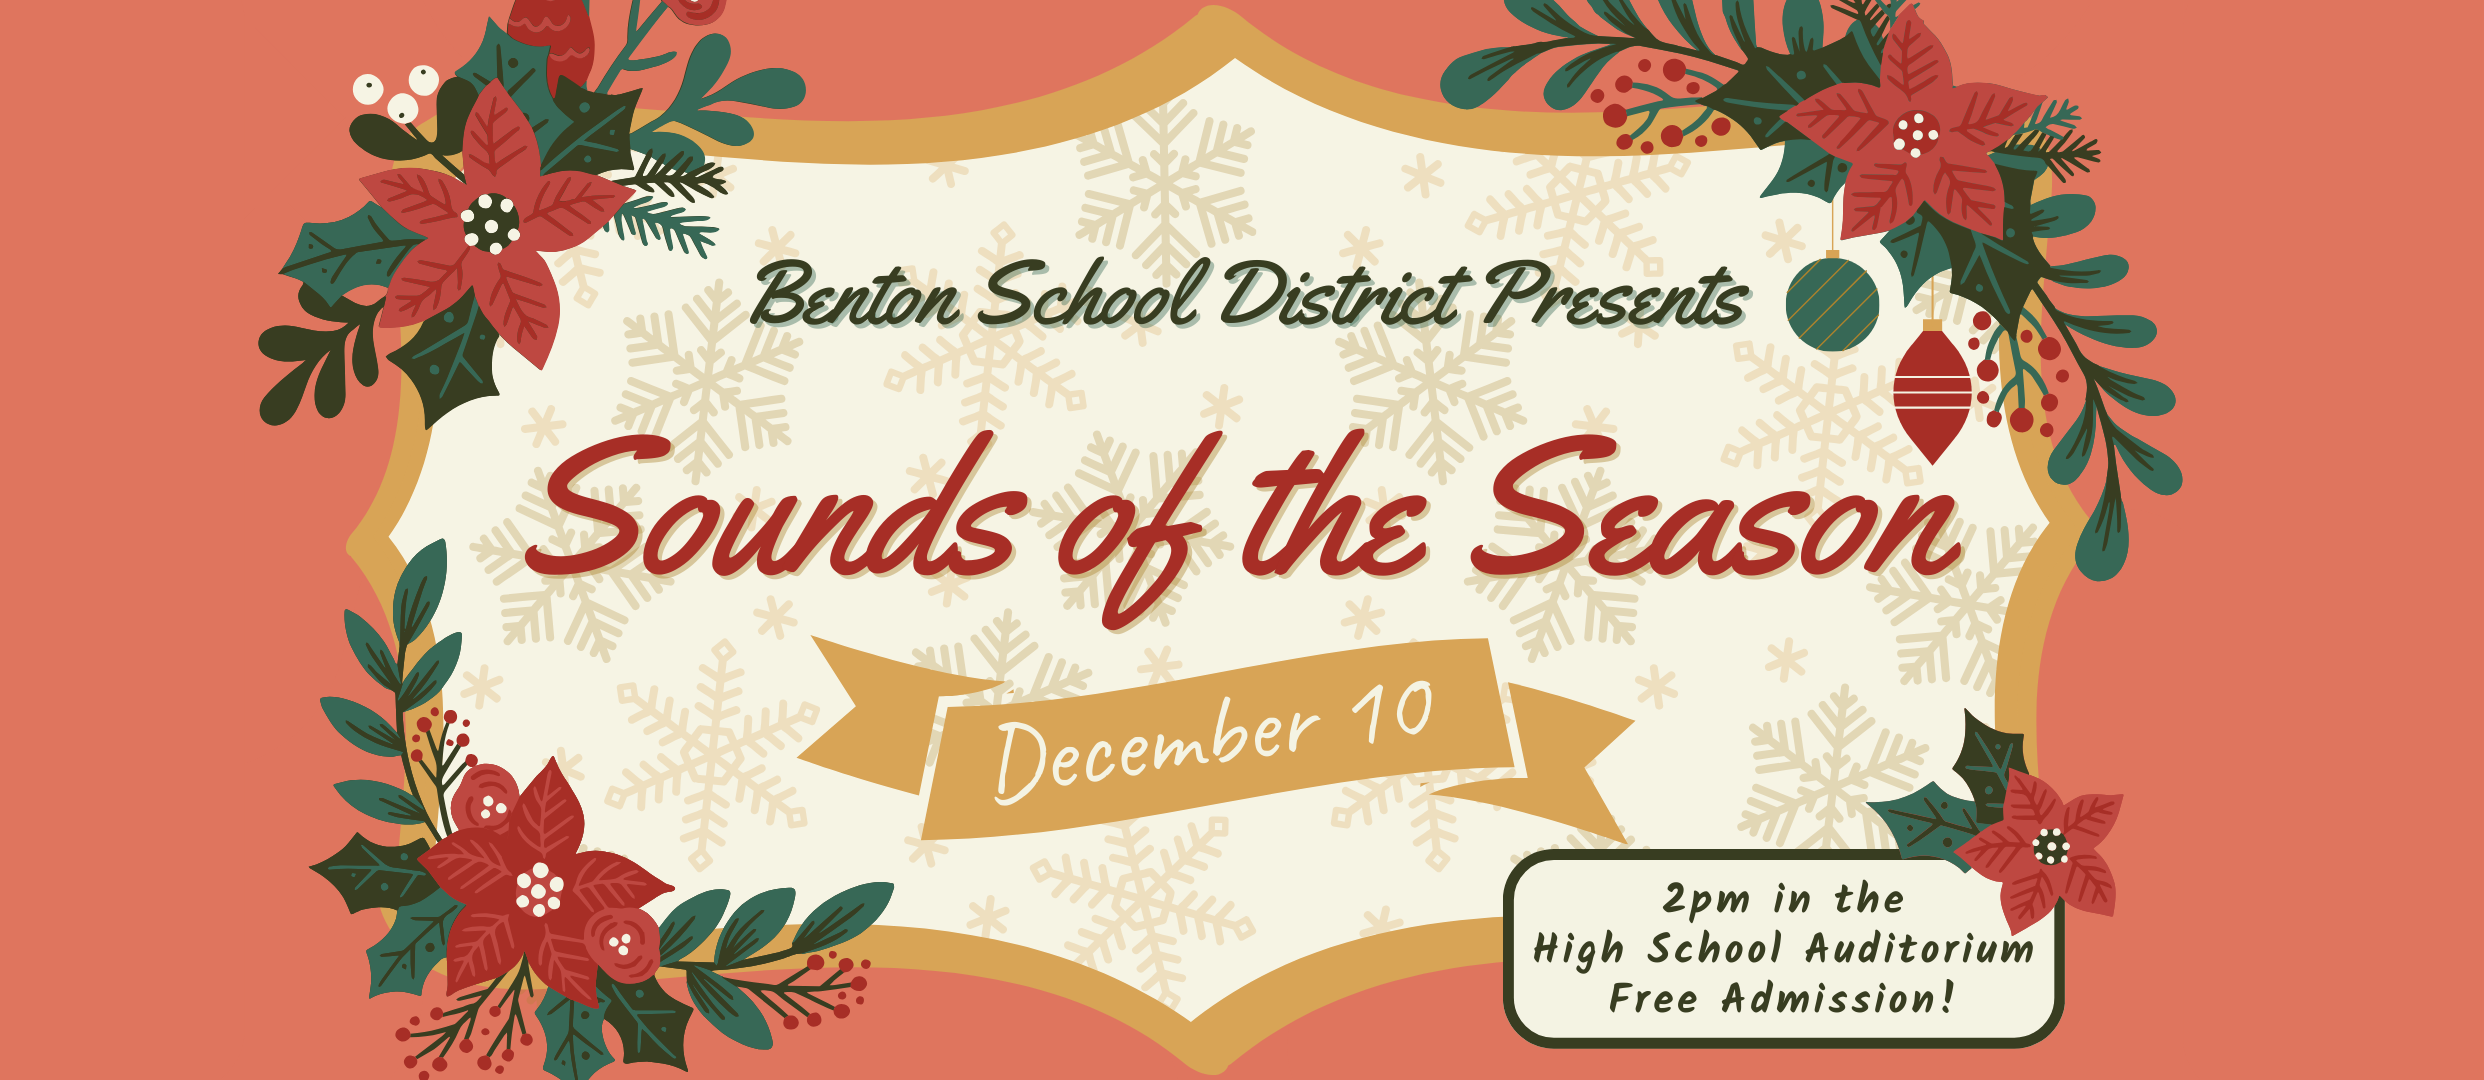 Benton School District Present: Sounds of the Season - December 10 at 2pm in the High School Auditorium.  Admission is free.